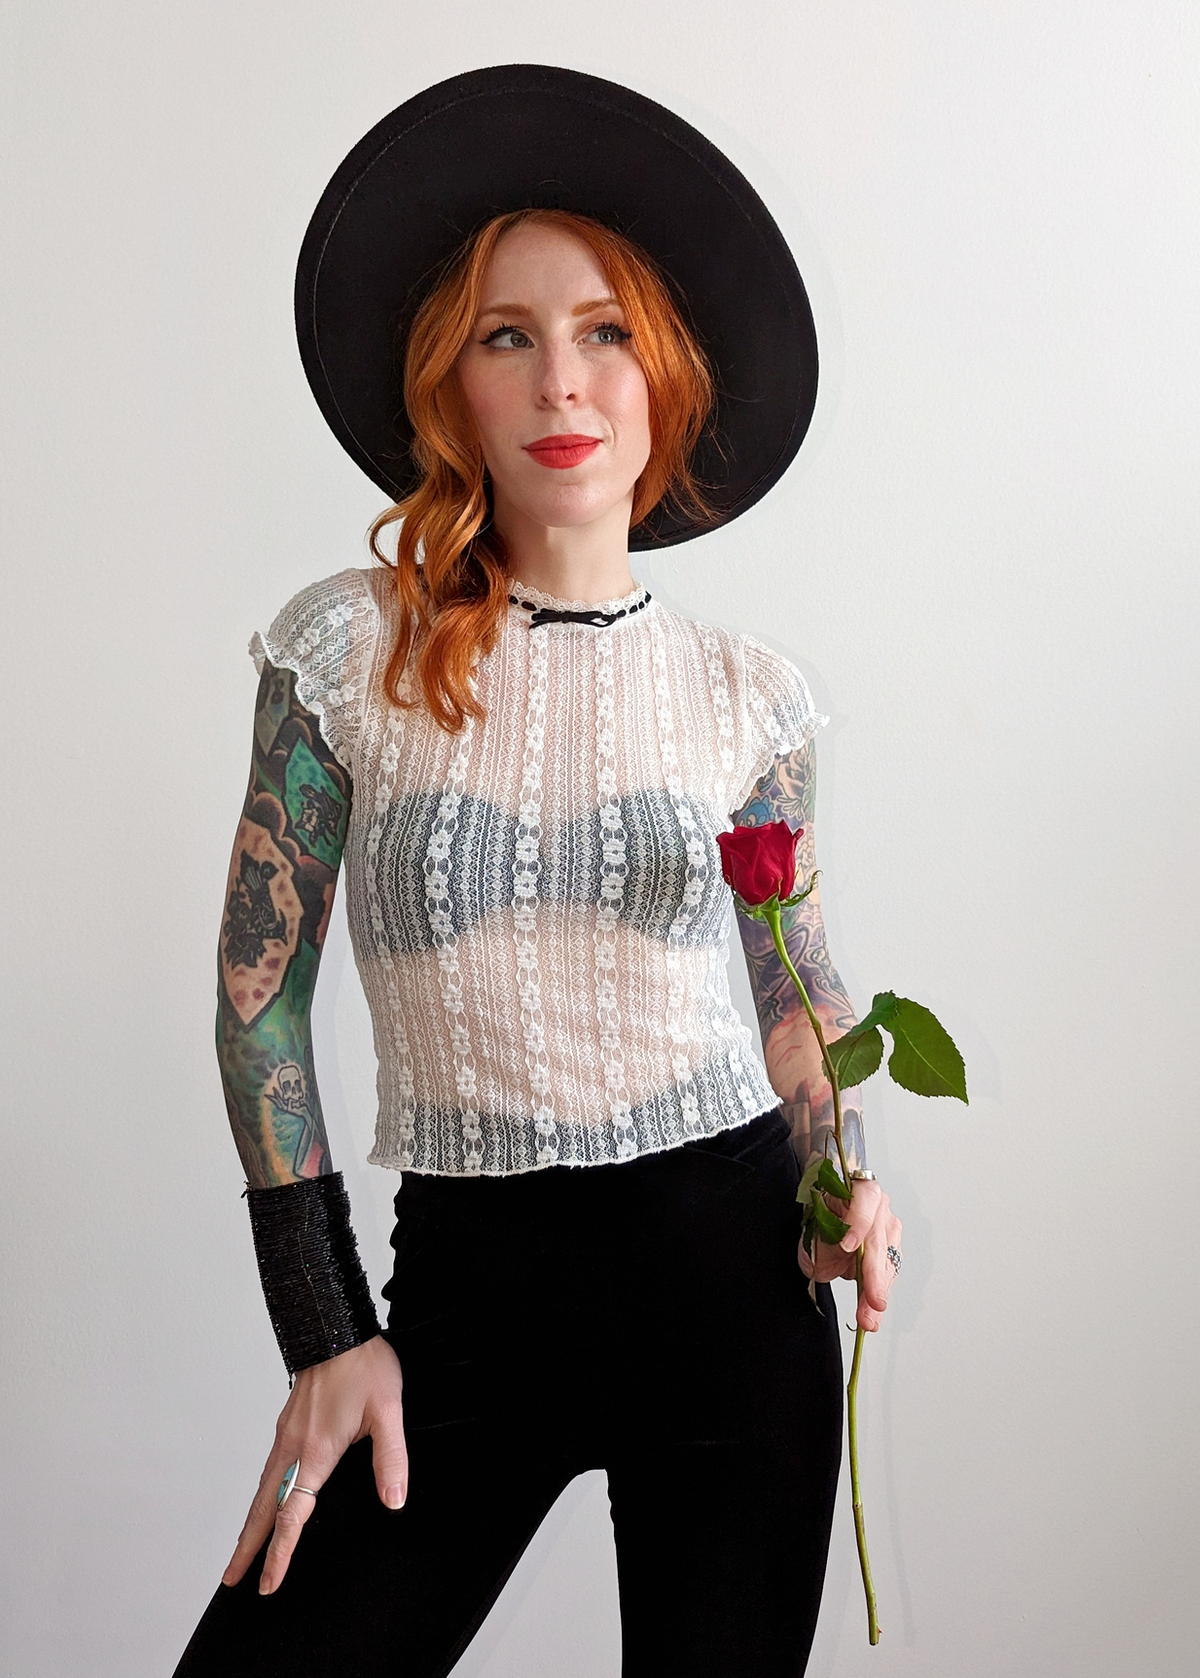 Romantic 90s inspired unlined sheer white lace cap sleeve top with velvet bow detail, by Motel Rocks